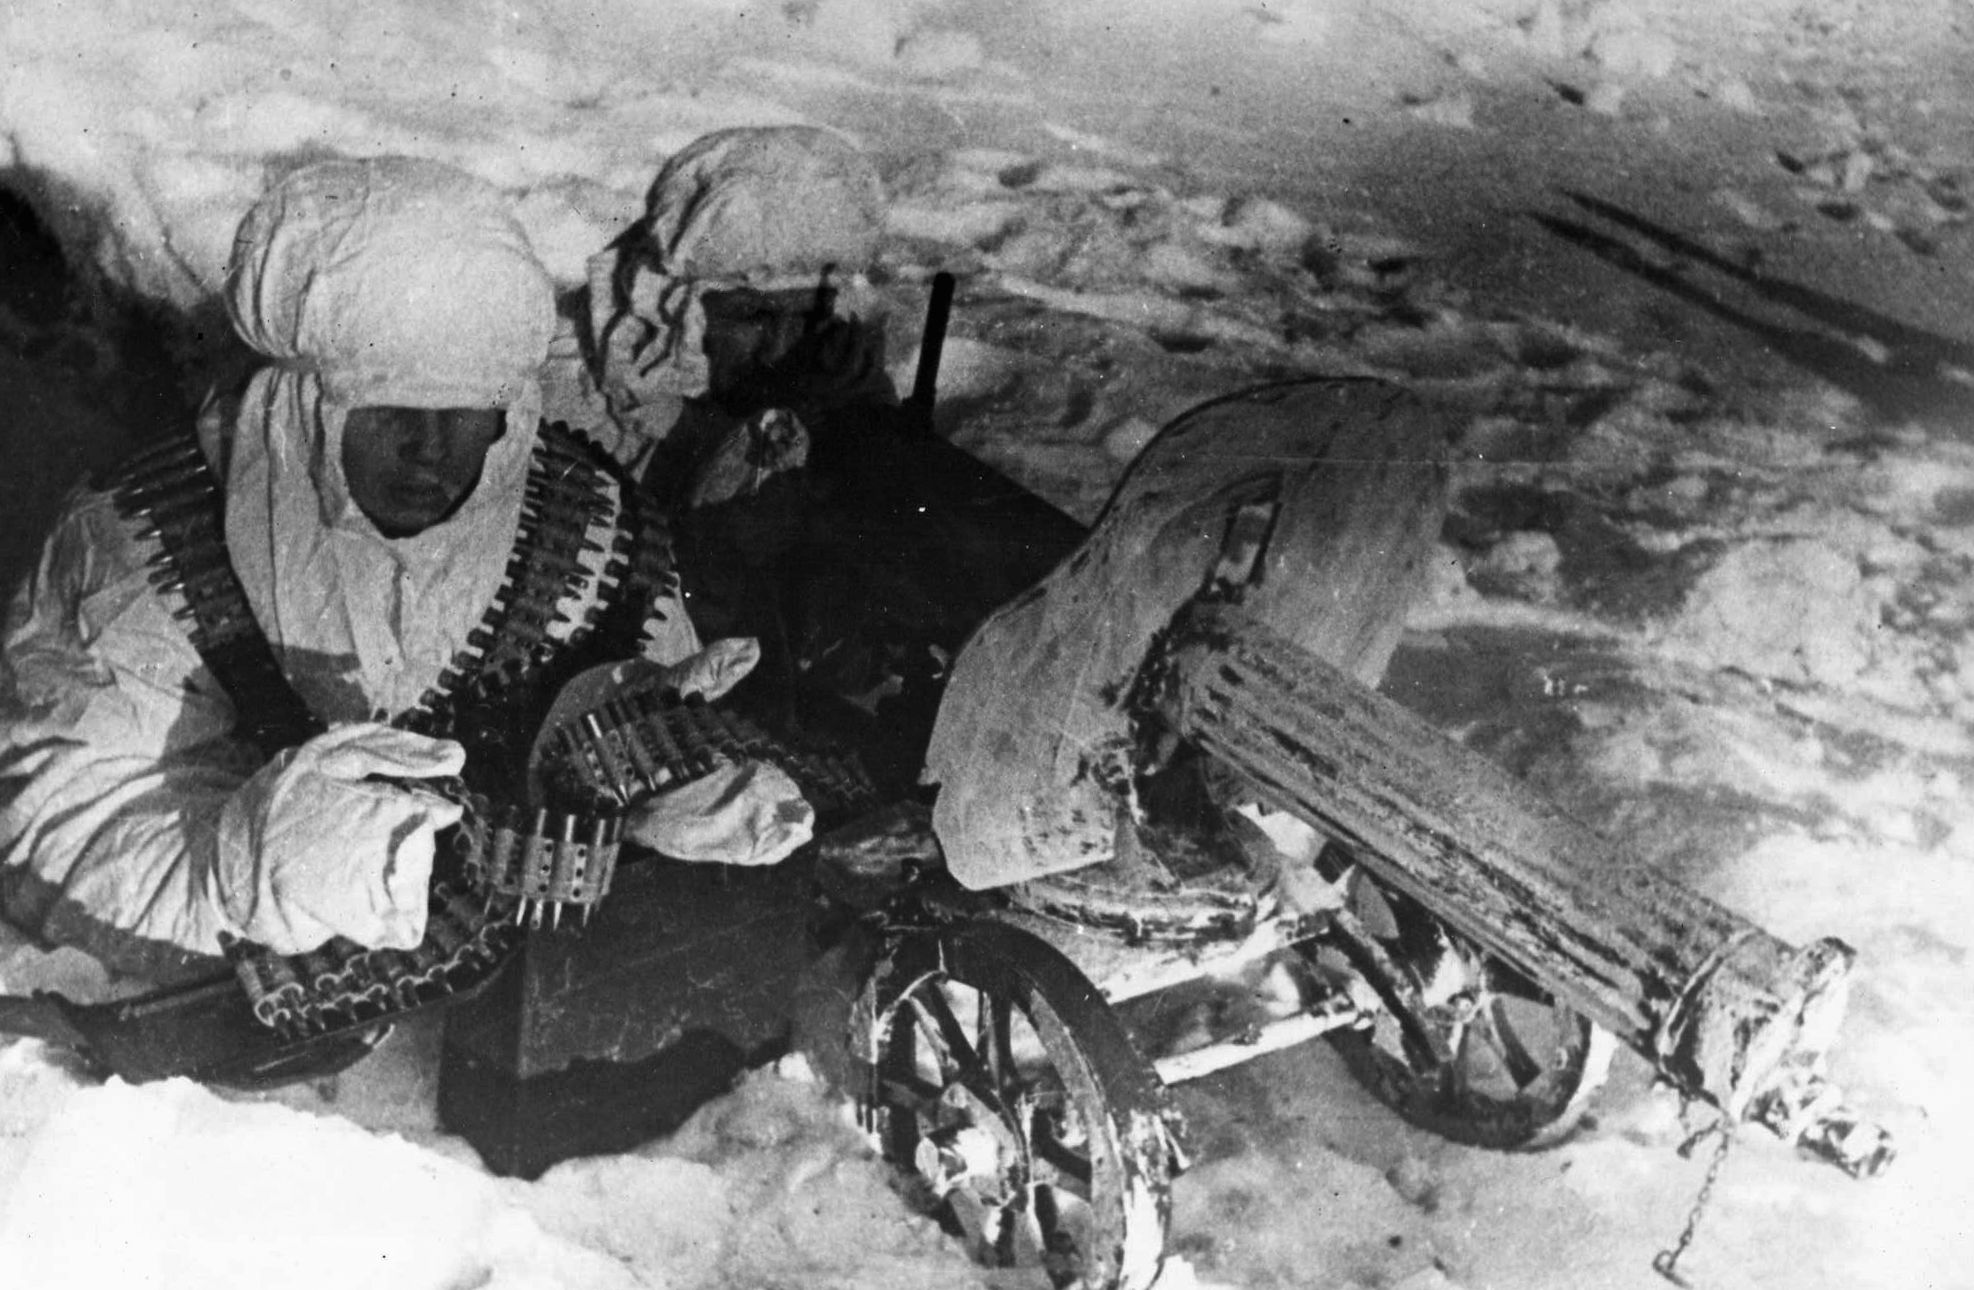 Wearing hooded camouflage uniforms, a pair of Red Army soldiers fires an antiquated machine gun at German positions. The winter weather created a no-man’s-land of snow and ice between opposing lines. 